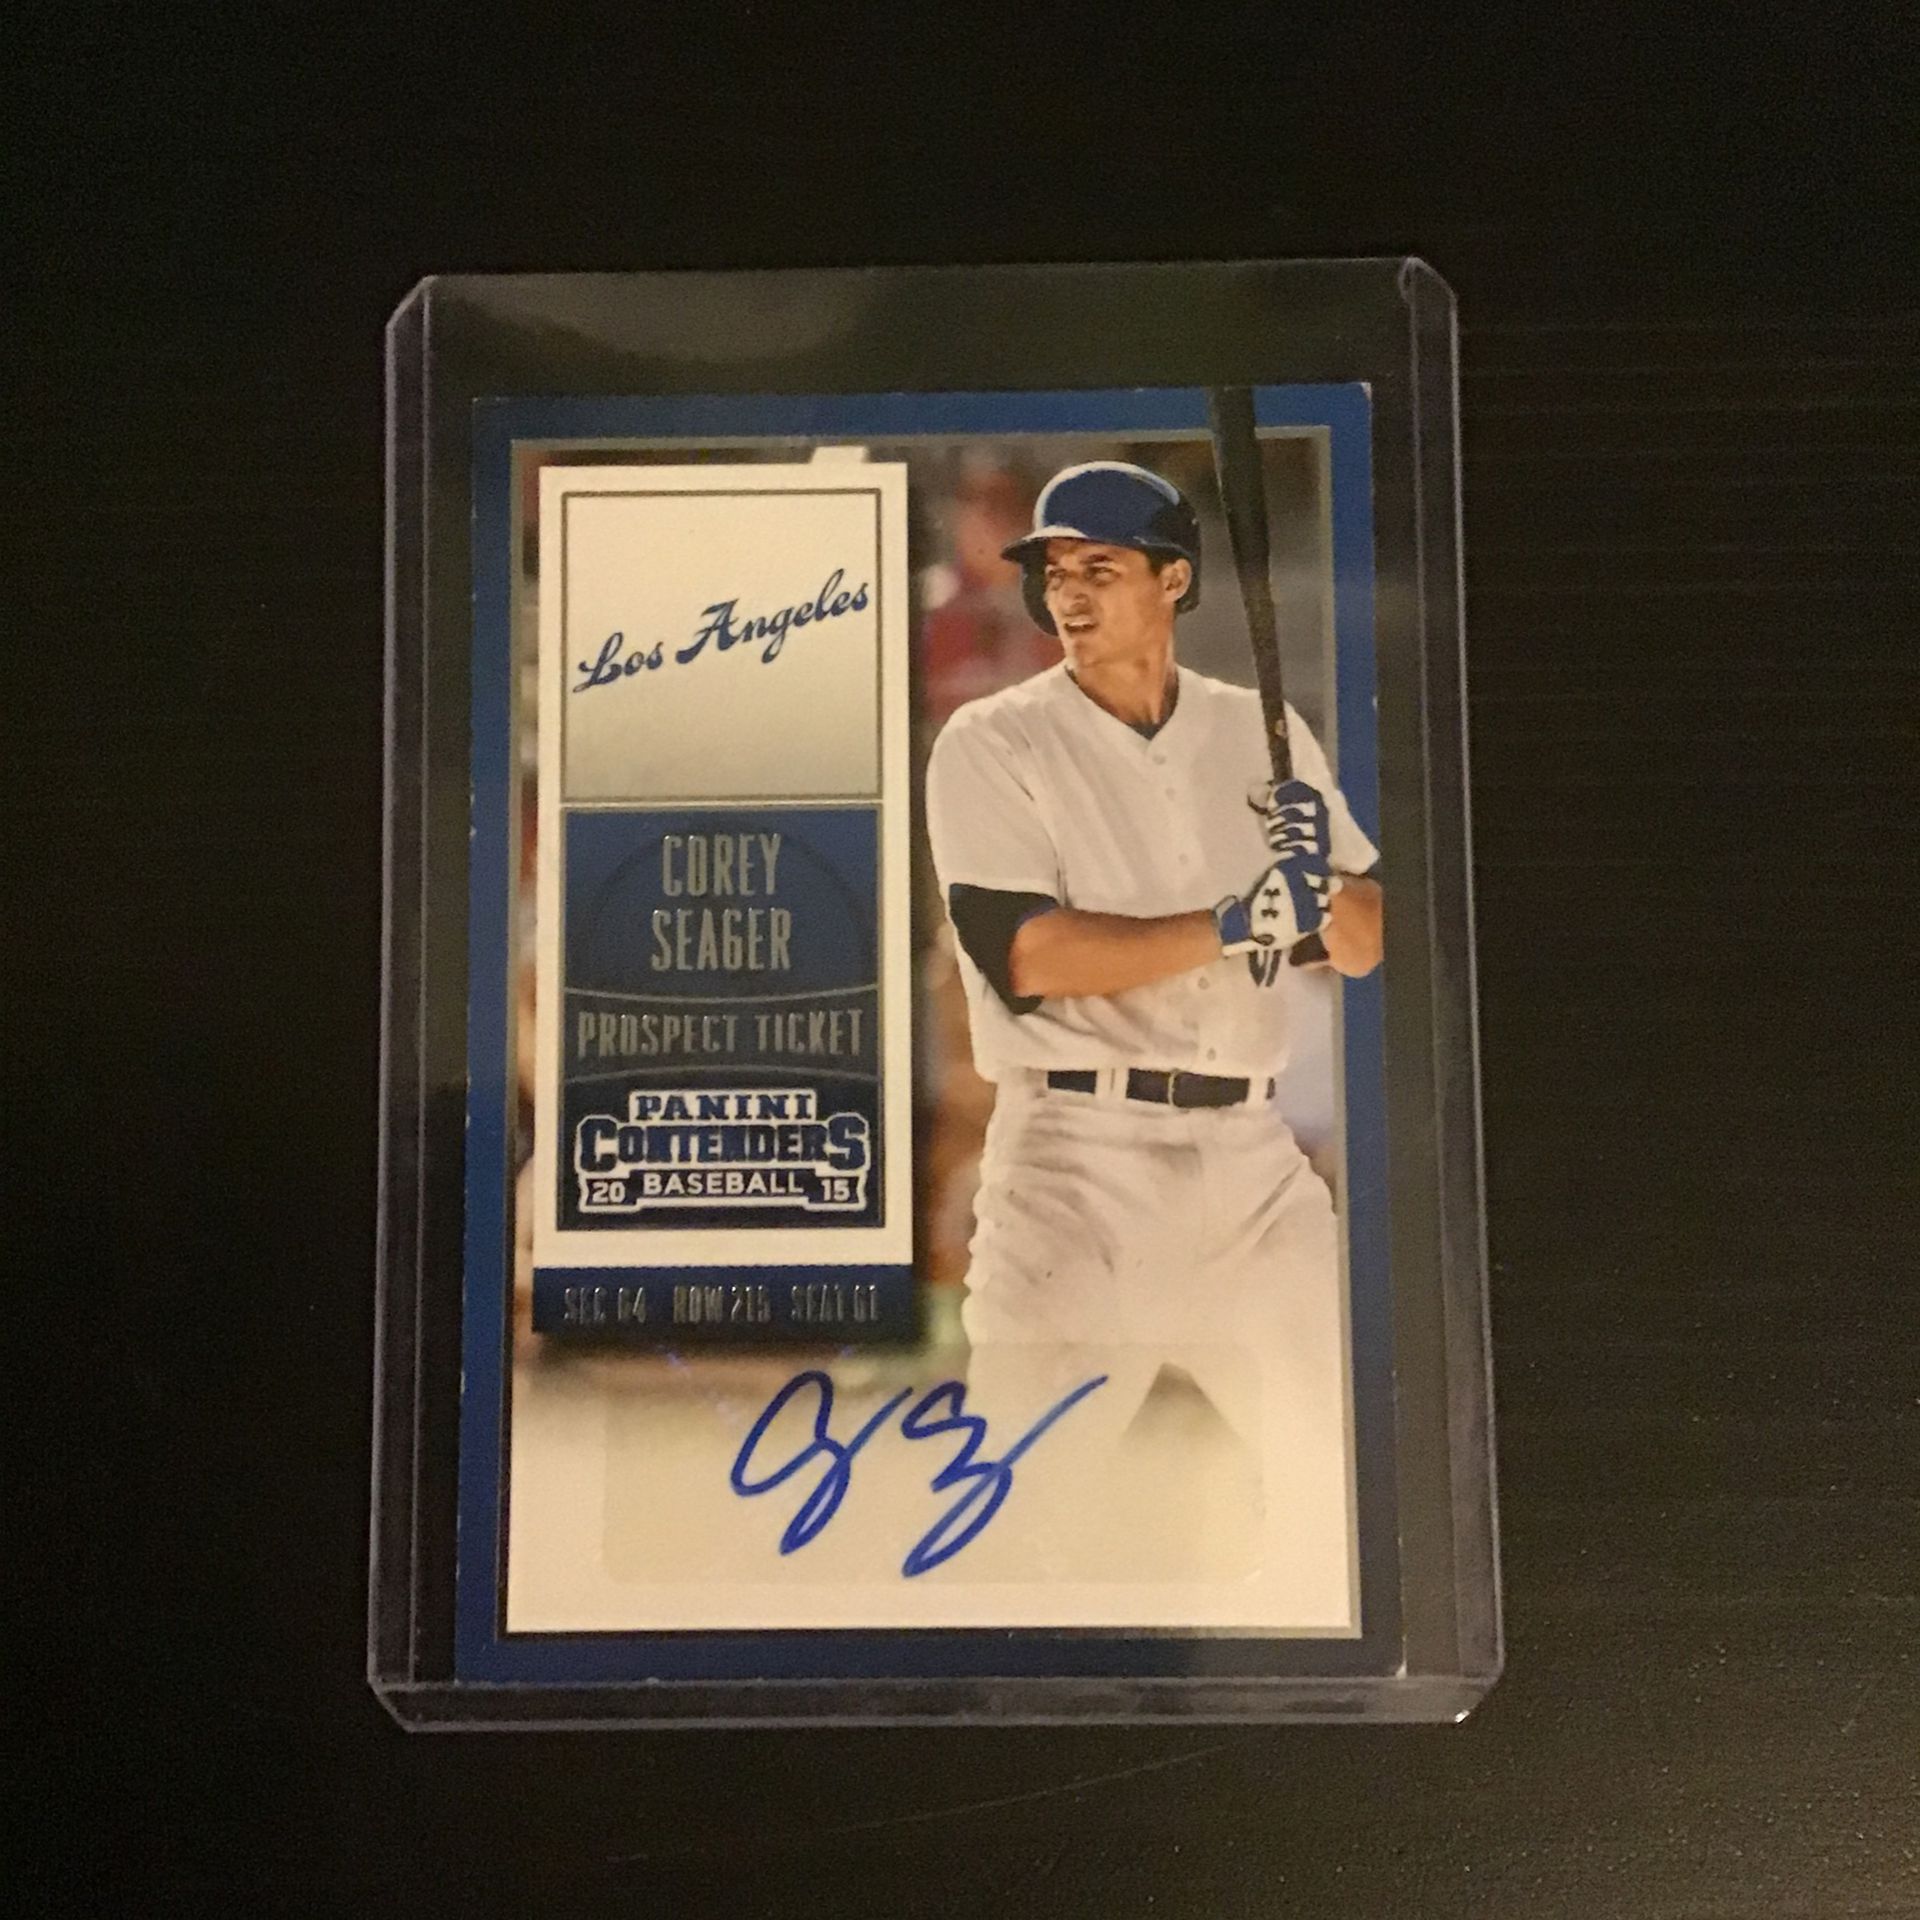 Corey Seager Panini Contenders 2015 Signed Baseball Card 